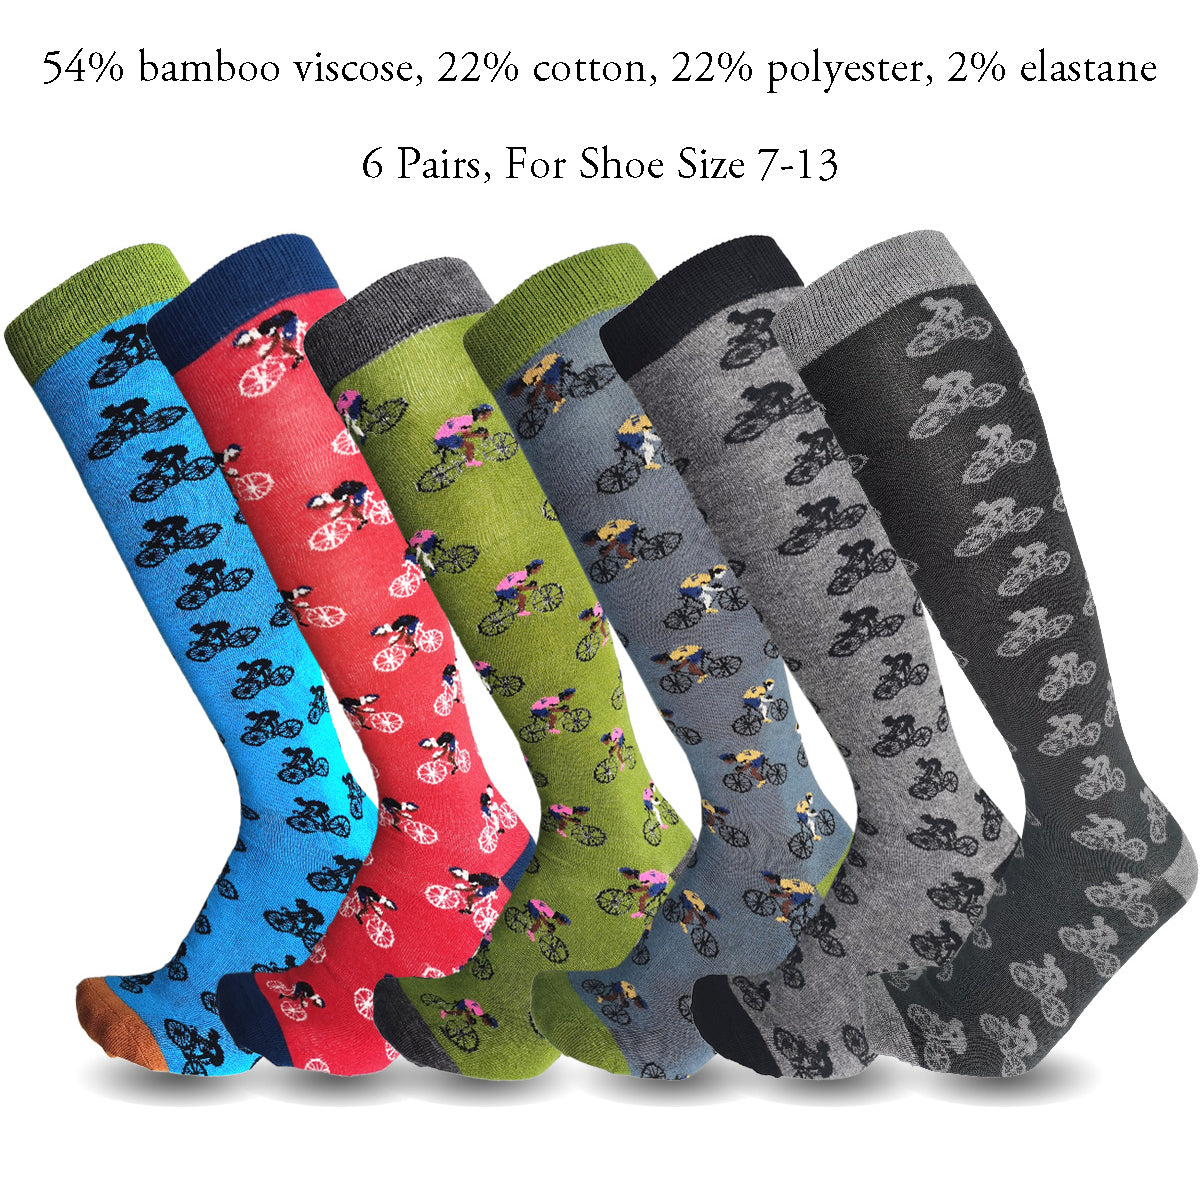 Lavencious Premium Soft and Comfort Bamboo Fiber Knee High Athletic Socks for Men Shoe Size 7-13 - 6 Pairs (Bicycle Pattern)